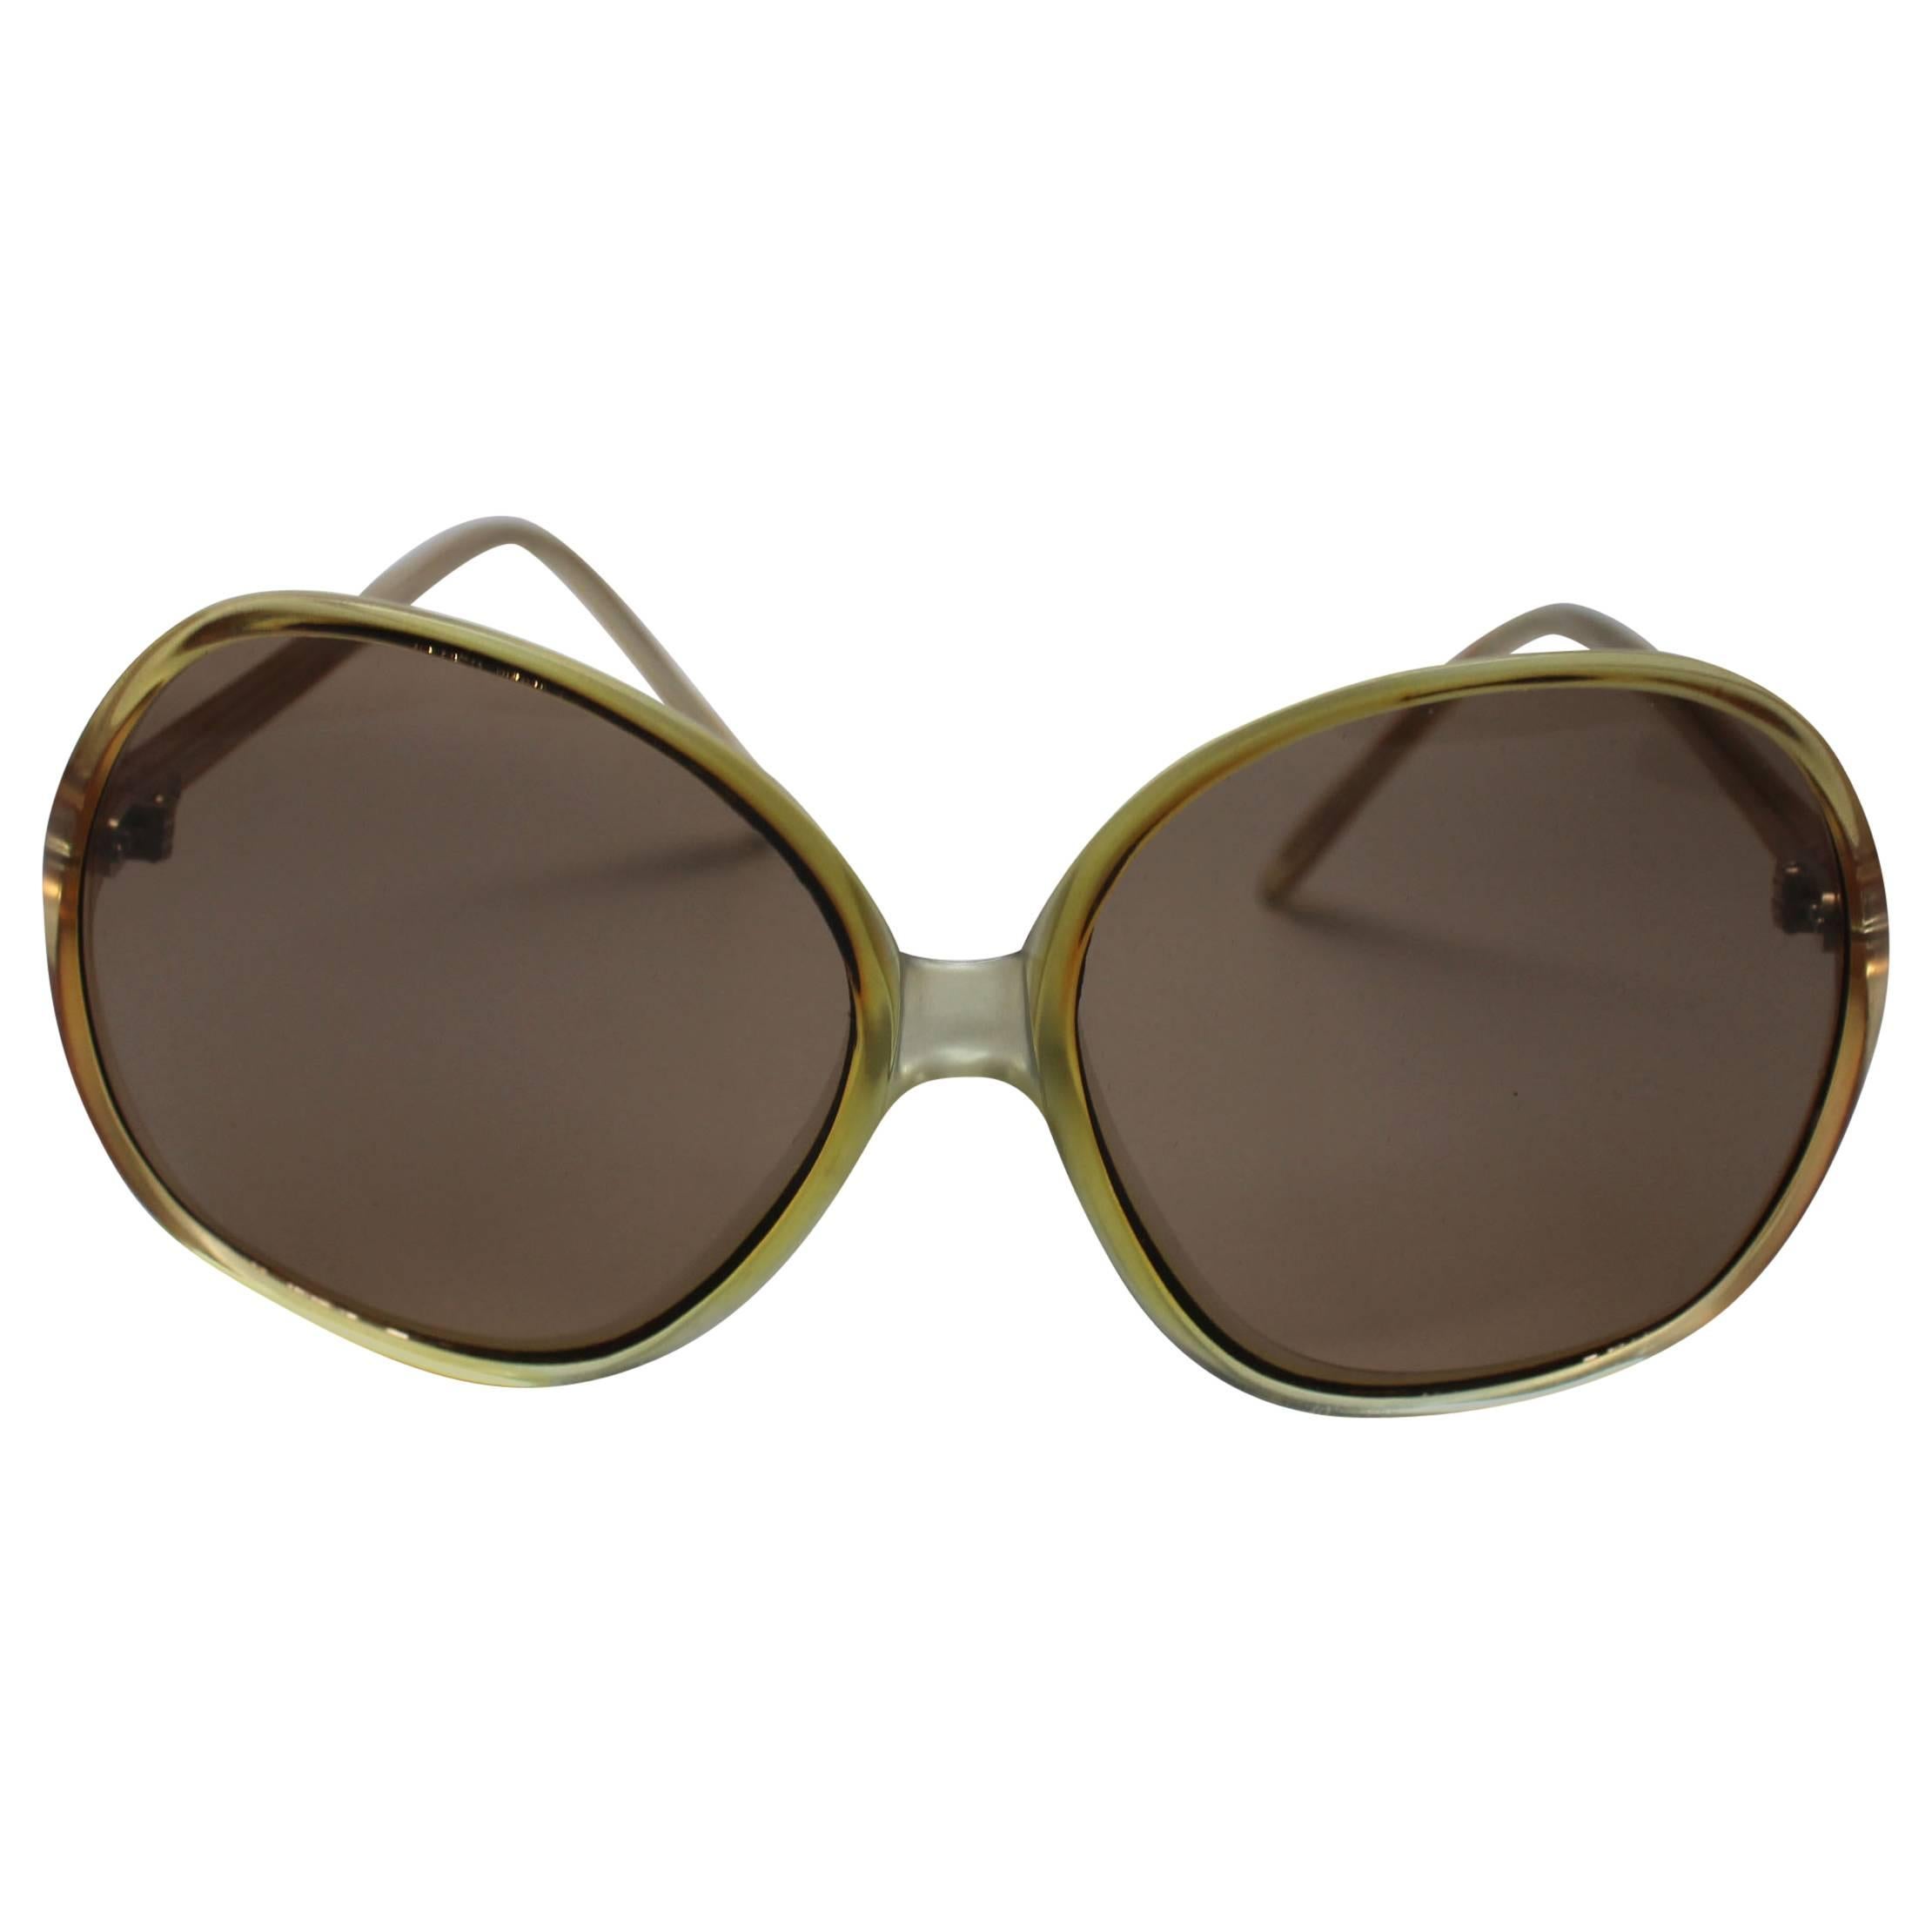 1970s Deadstock Sunglasses Made In France For Sale